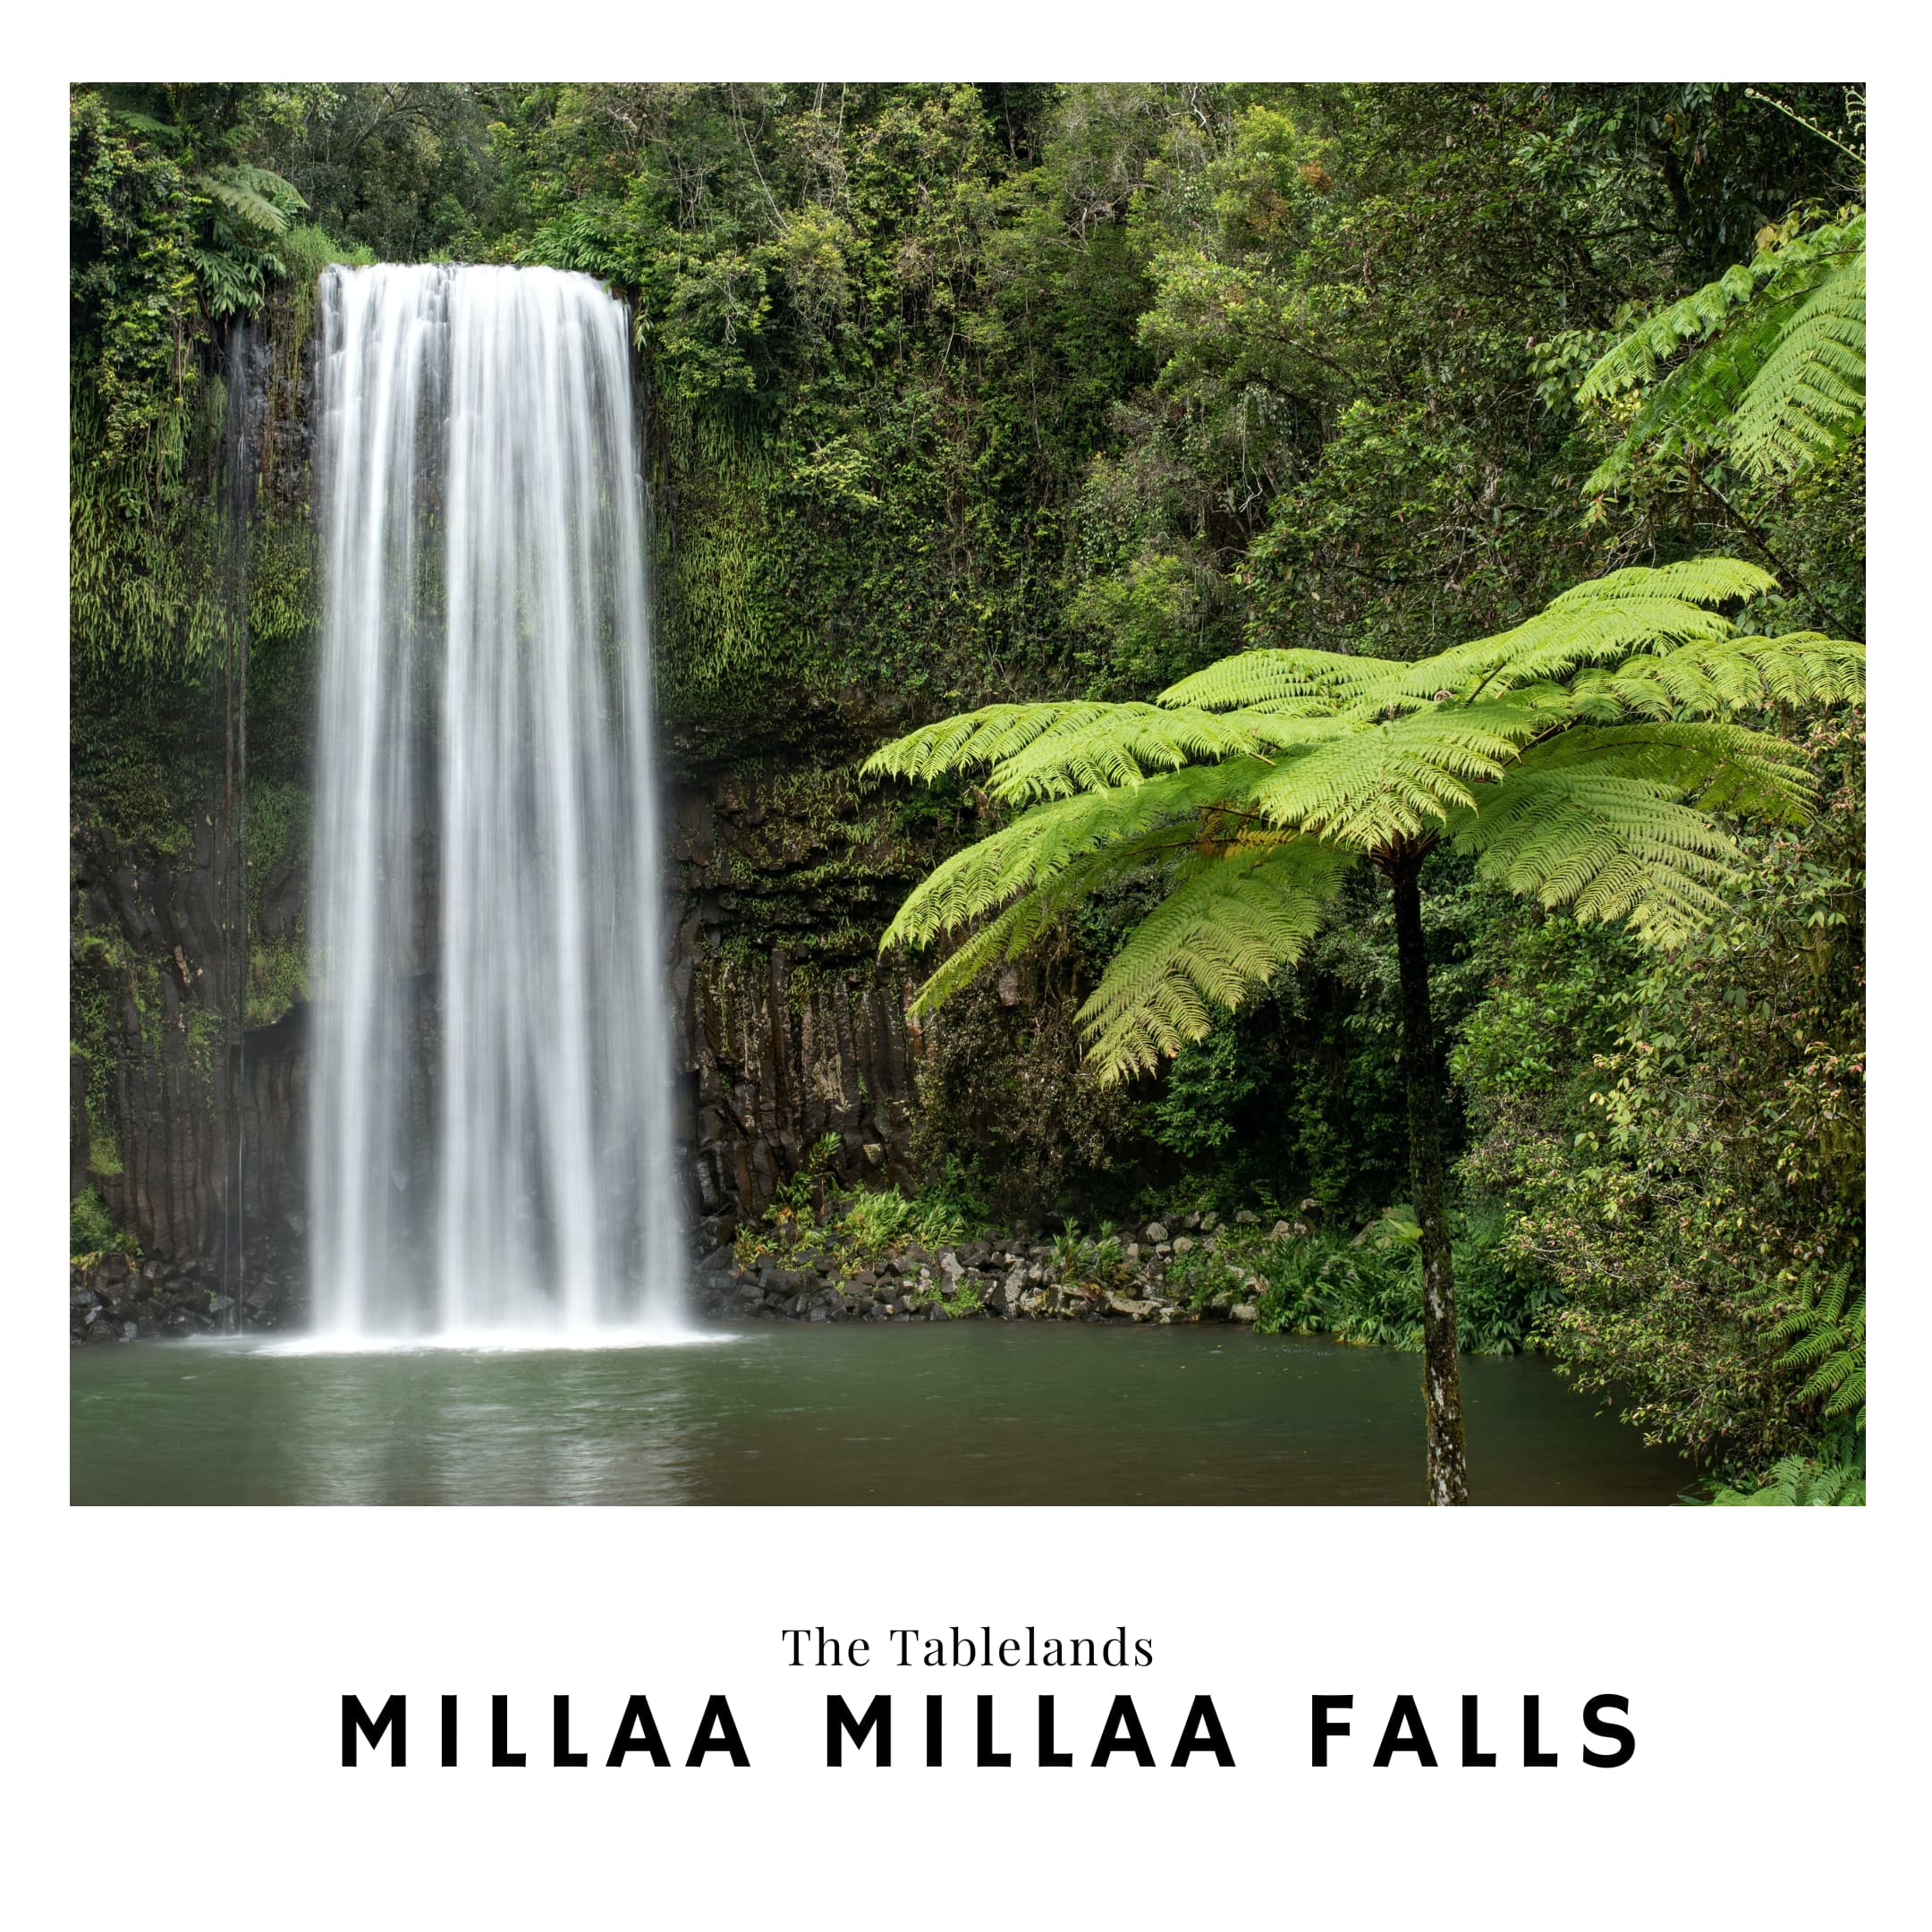 Link to the Millaa Milla Falls travel guide in Australia